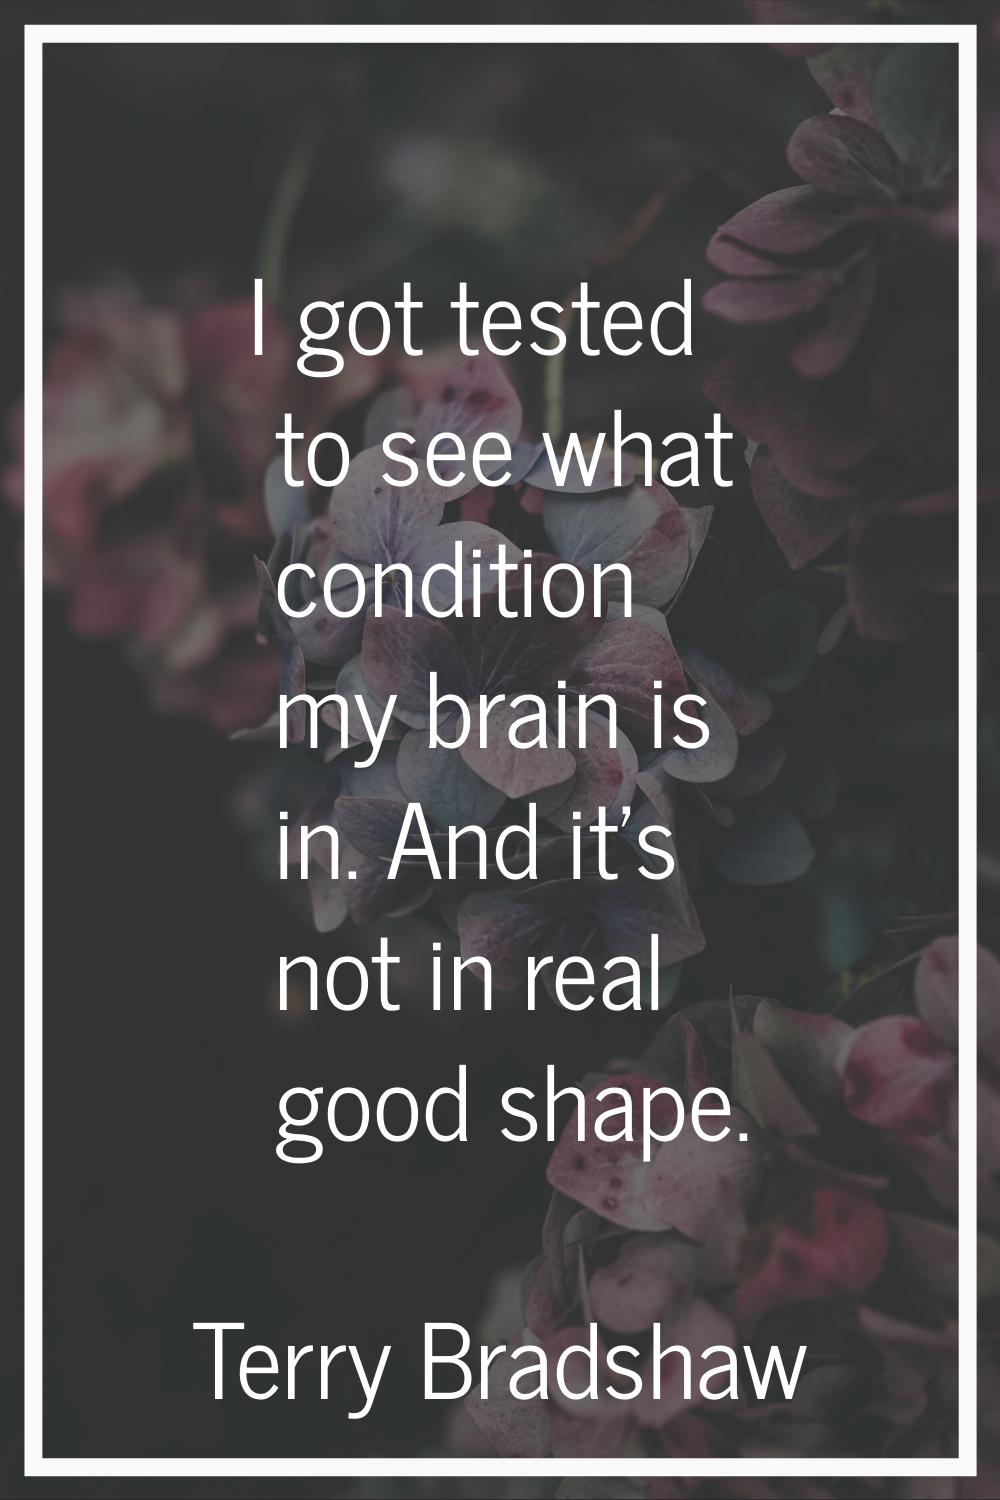 I got tested to see what condition my brain is in. And it's not in real good shape.